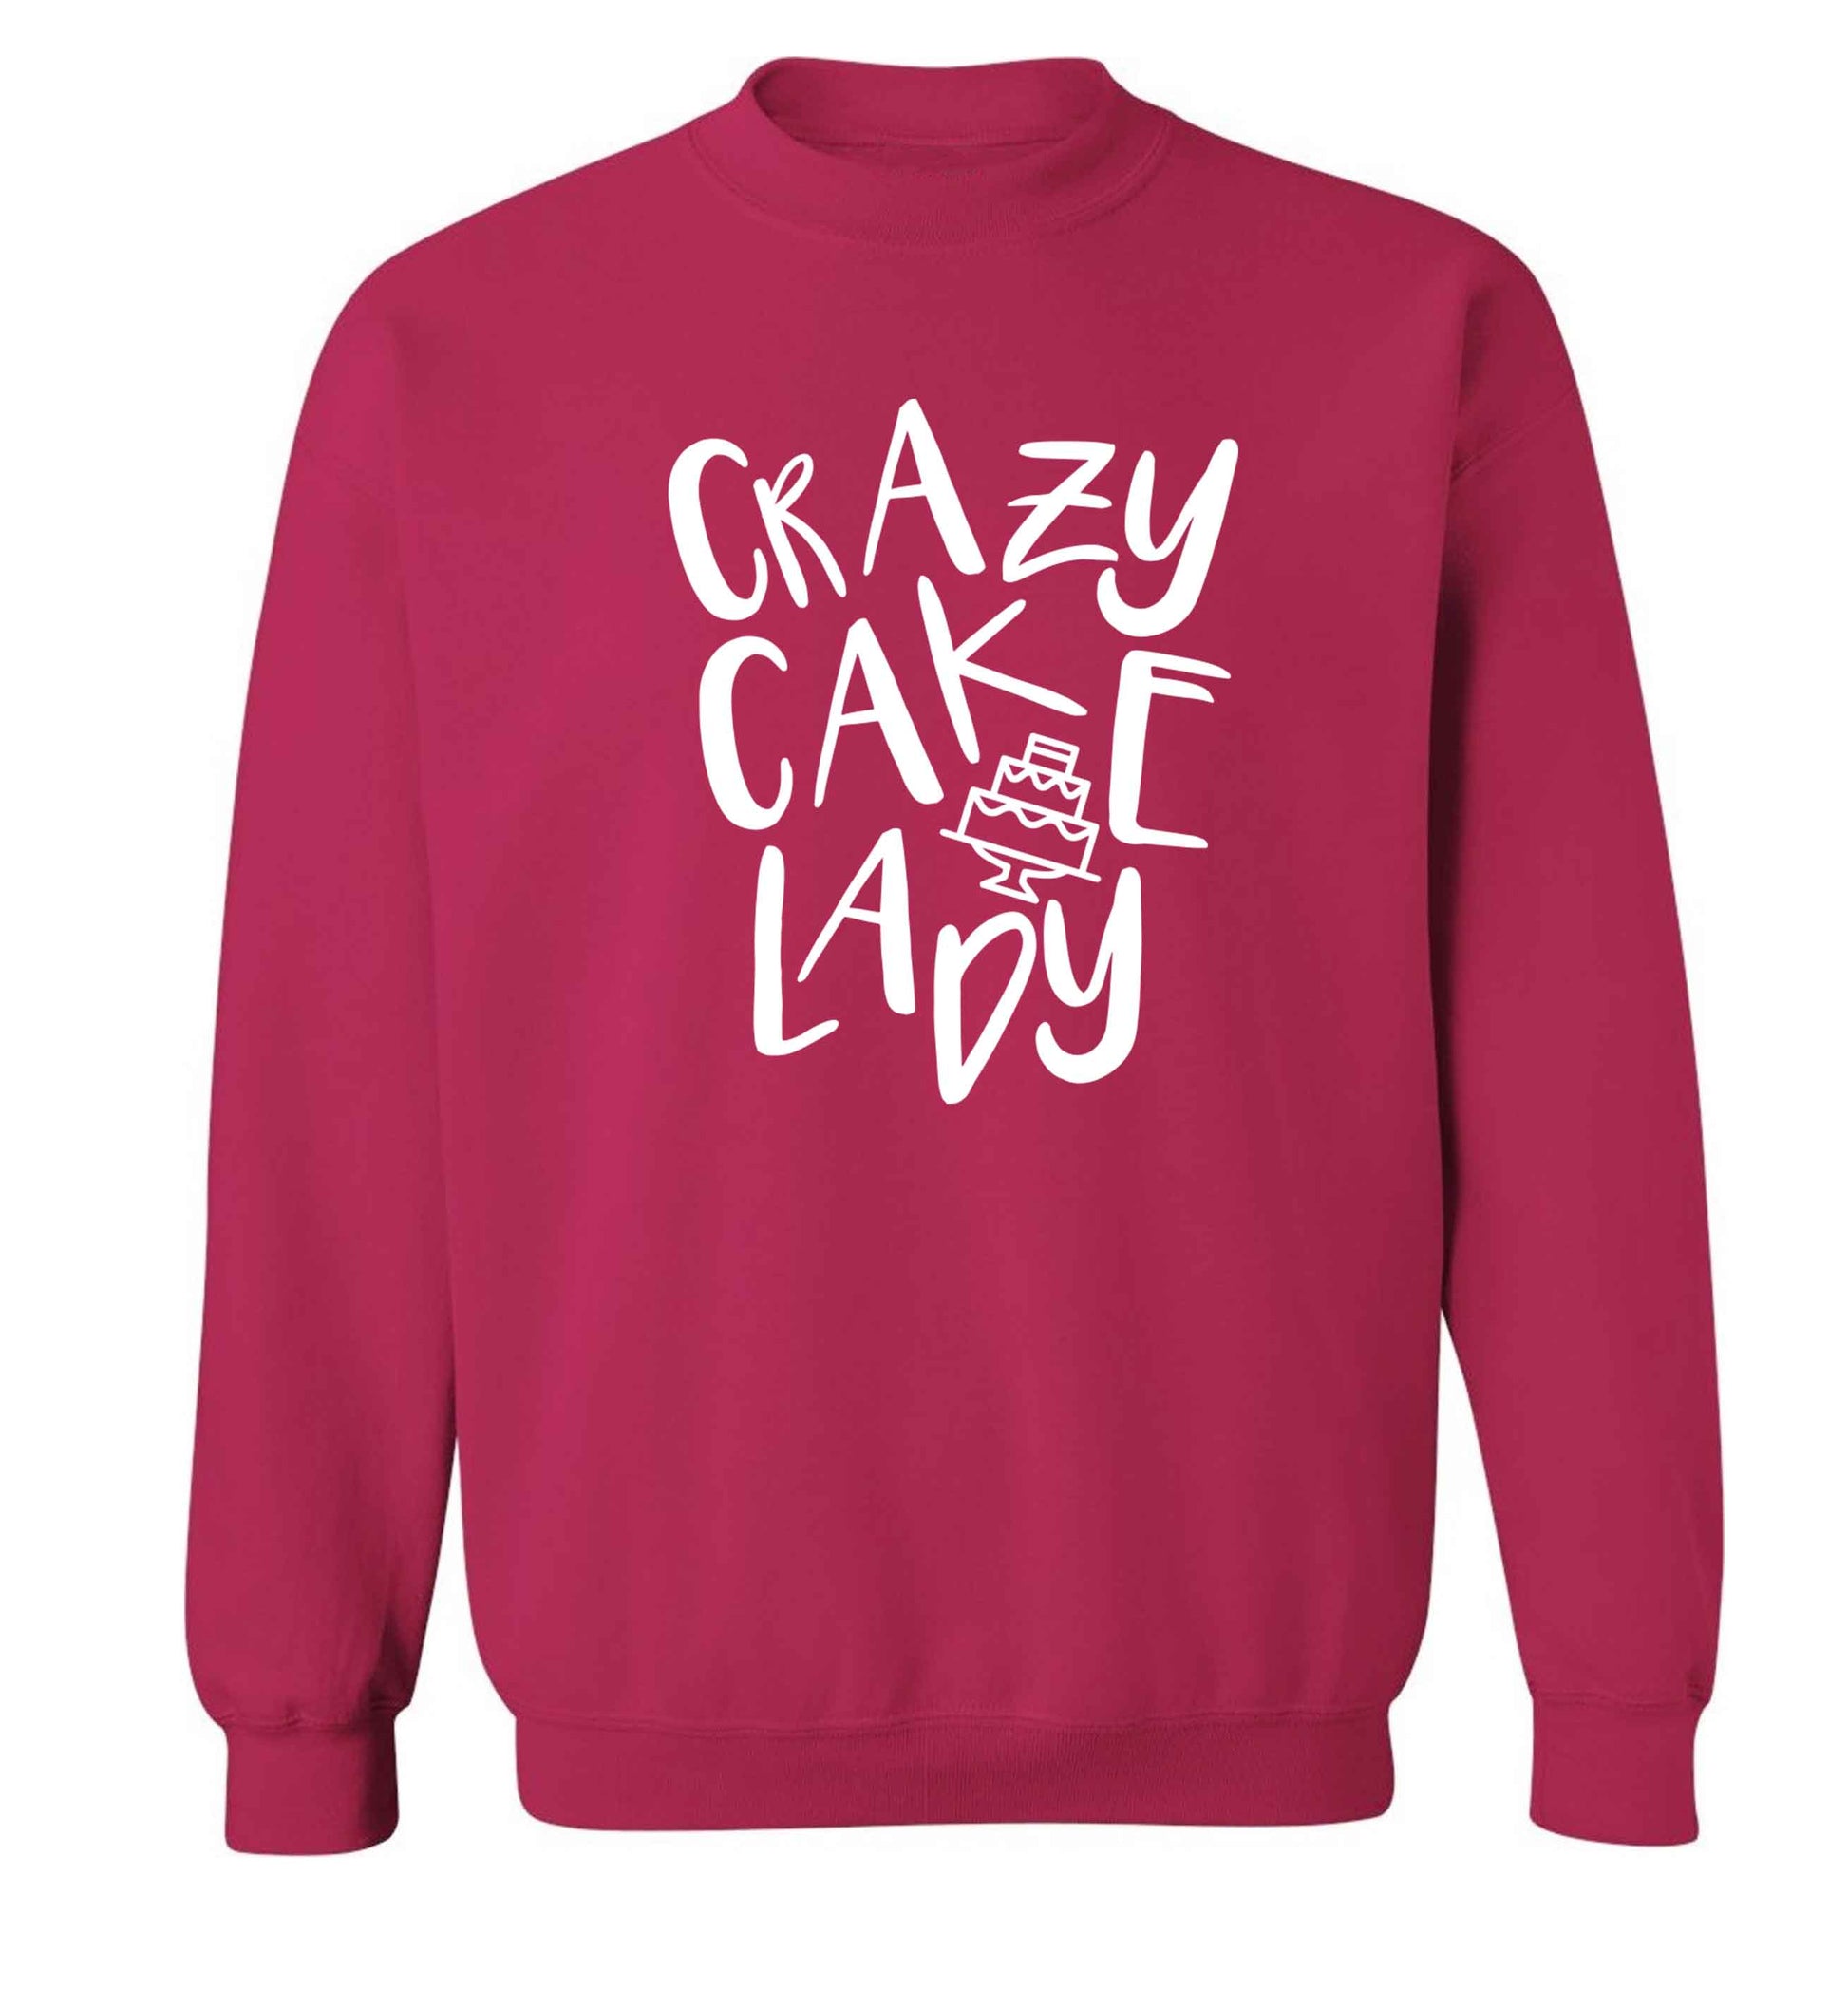 Crazy cake lady Adult's unisex pink Sweater 2XL